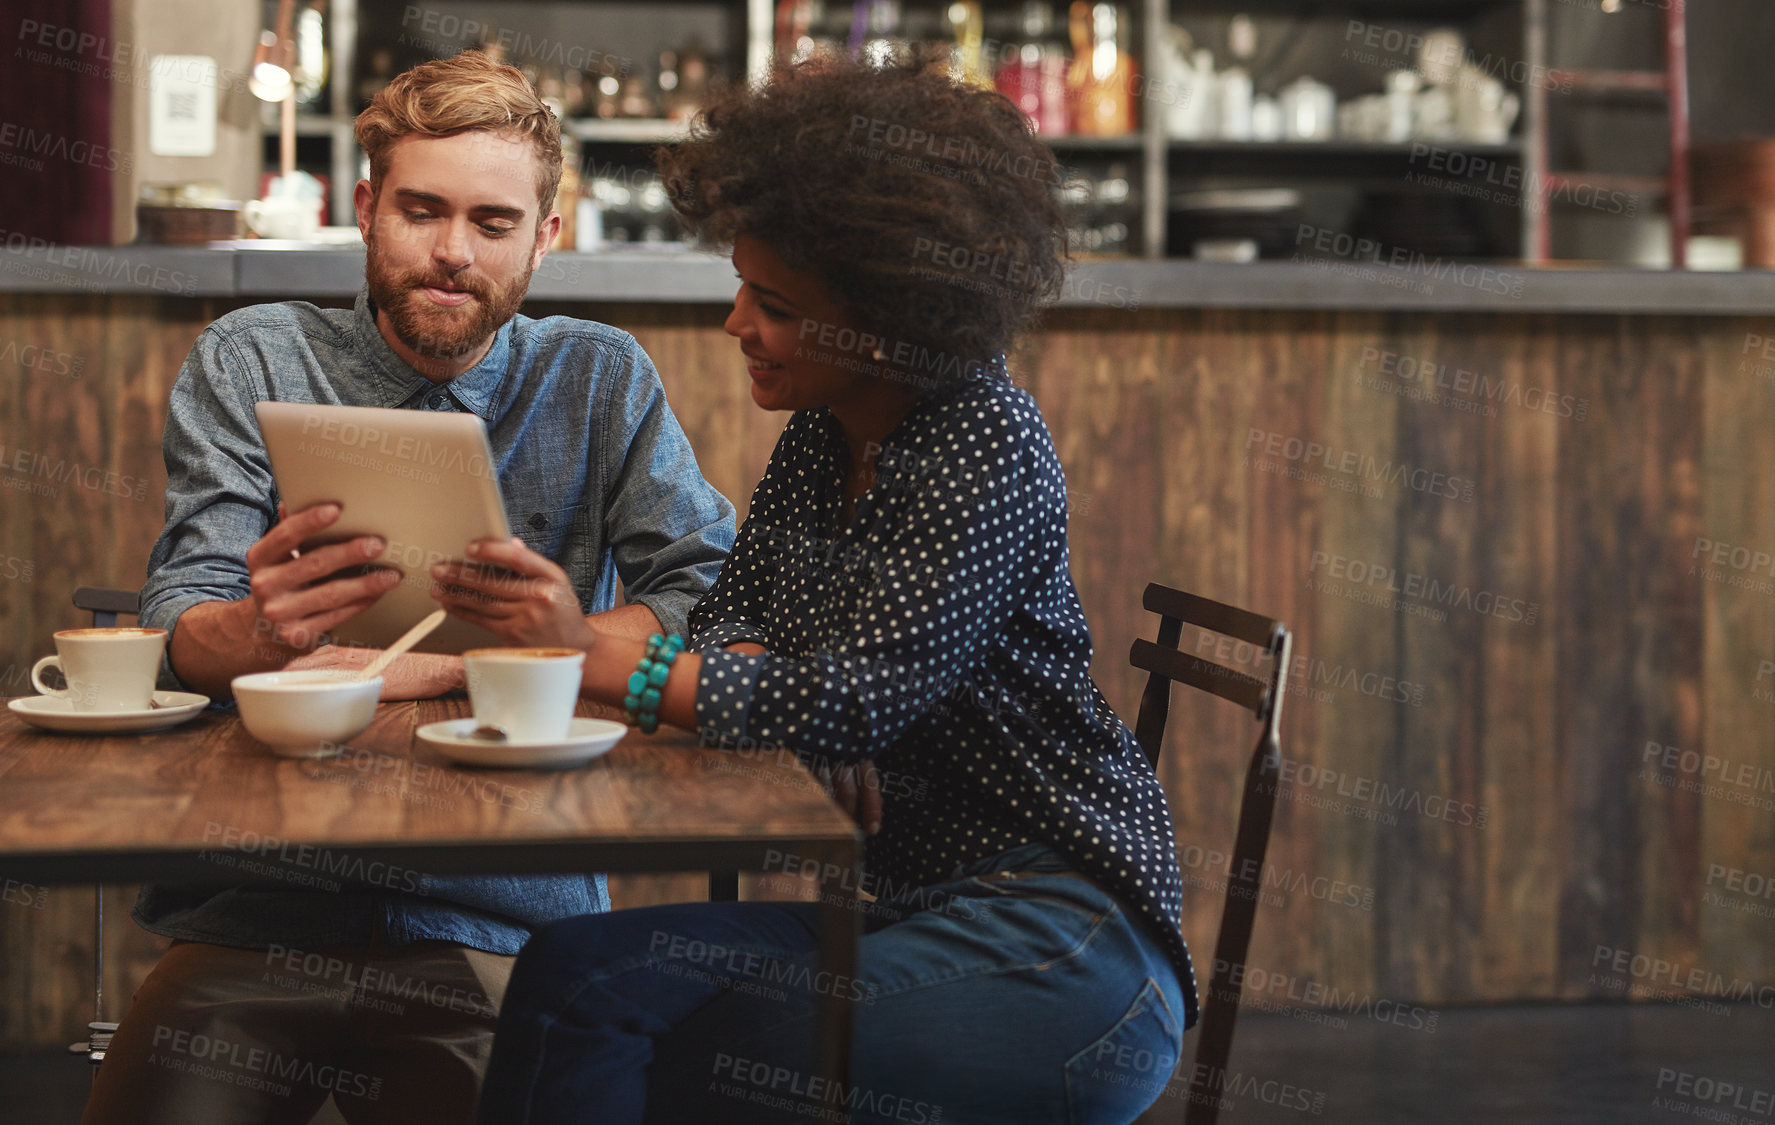 Buy stock photo Shot of a young couple using a digital tablet together on a coffee date